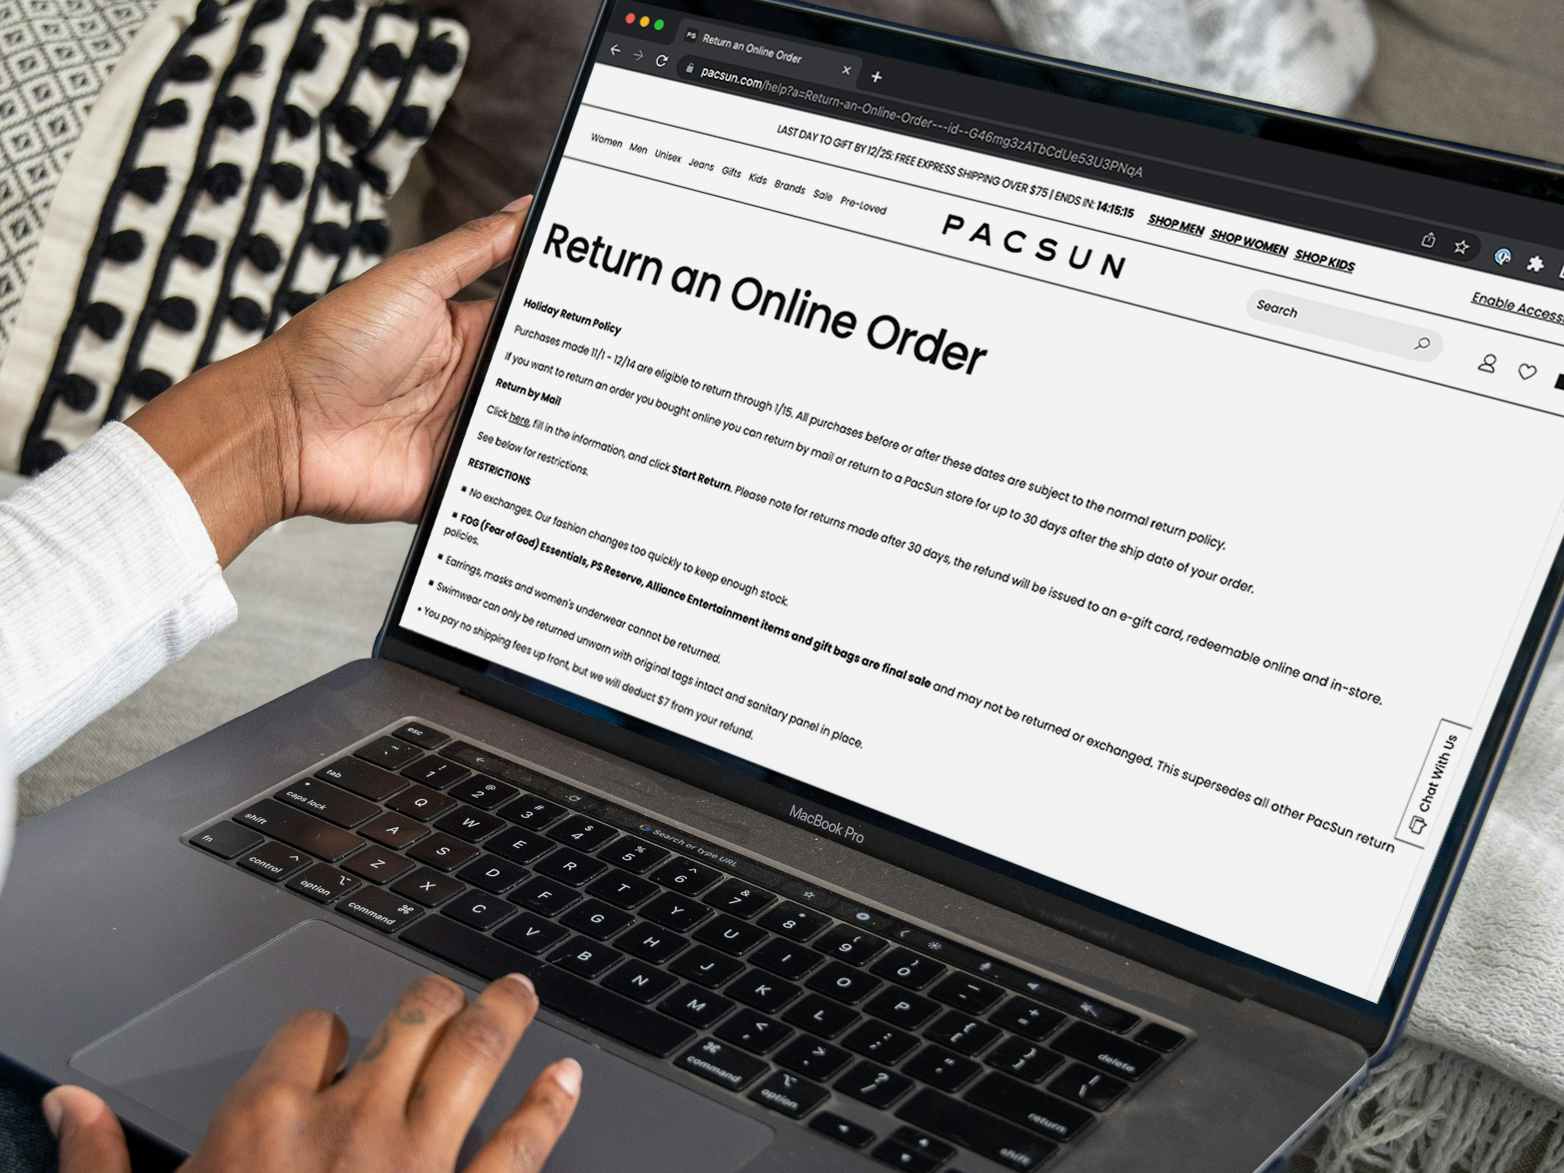 Someone reading the Pacsun return policy on their website